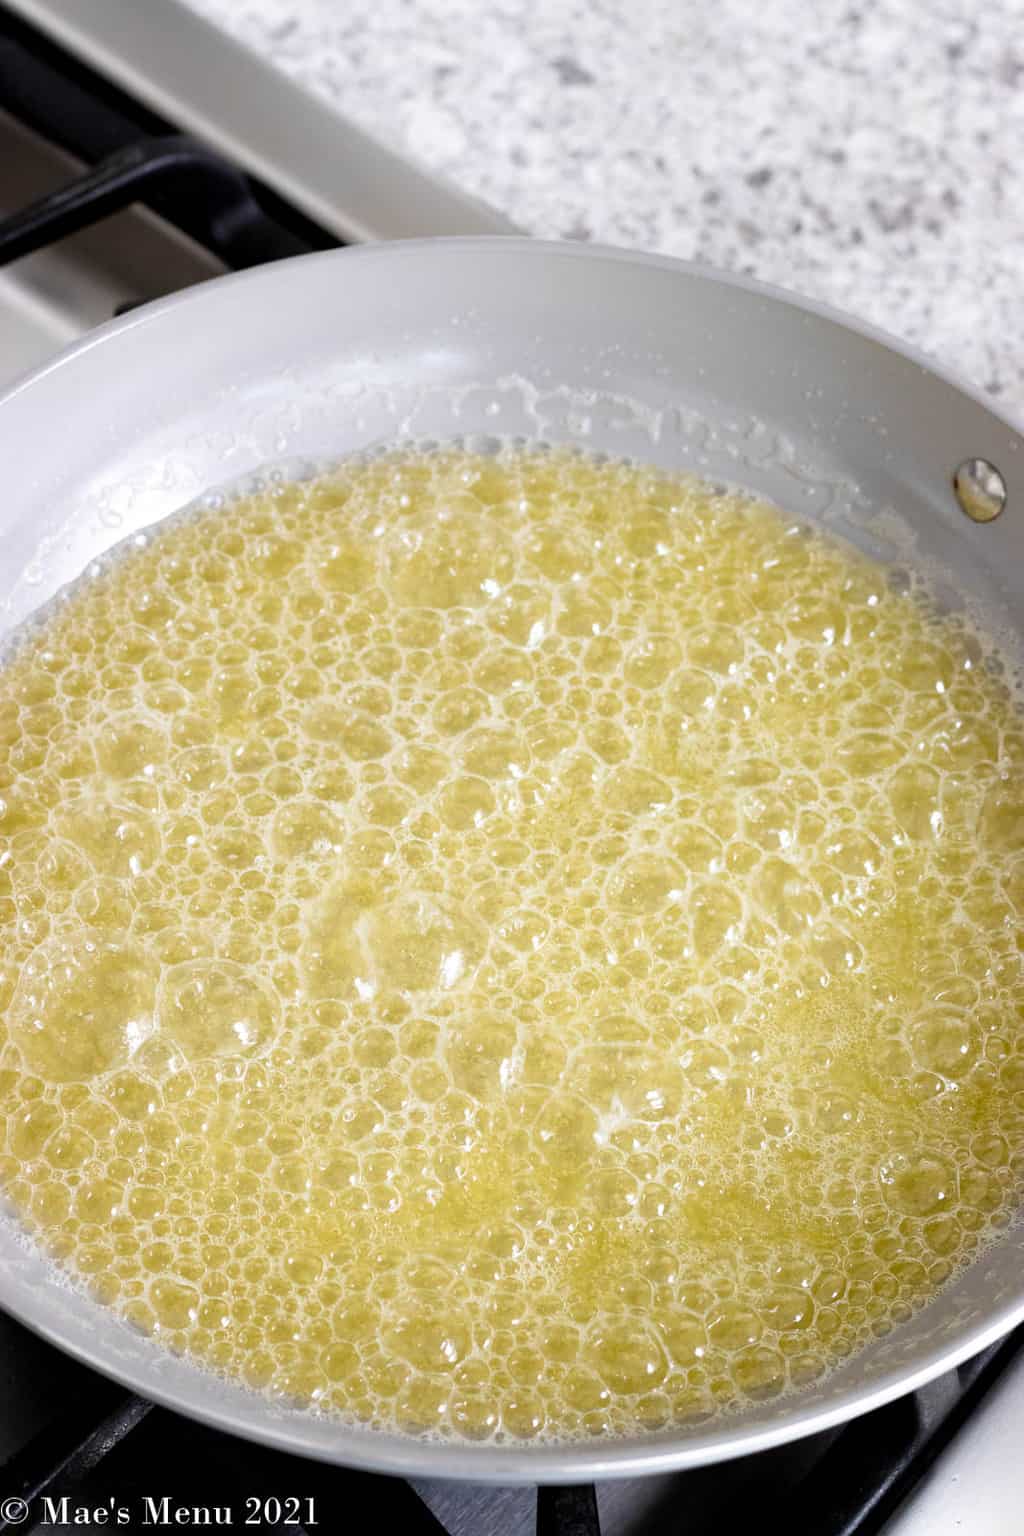 Melted butter cooking and foaming in a large skillet